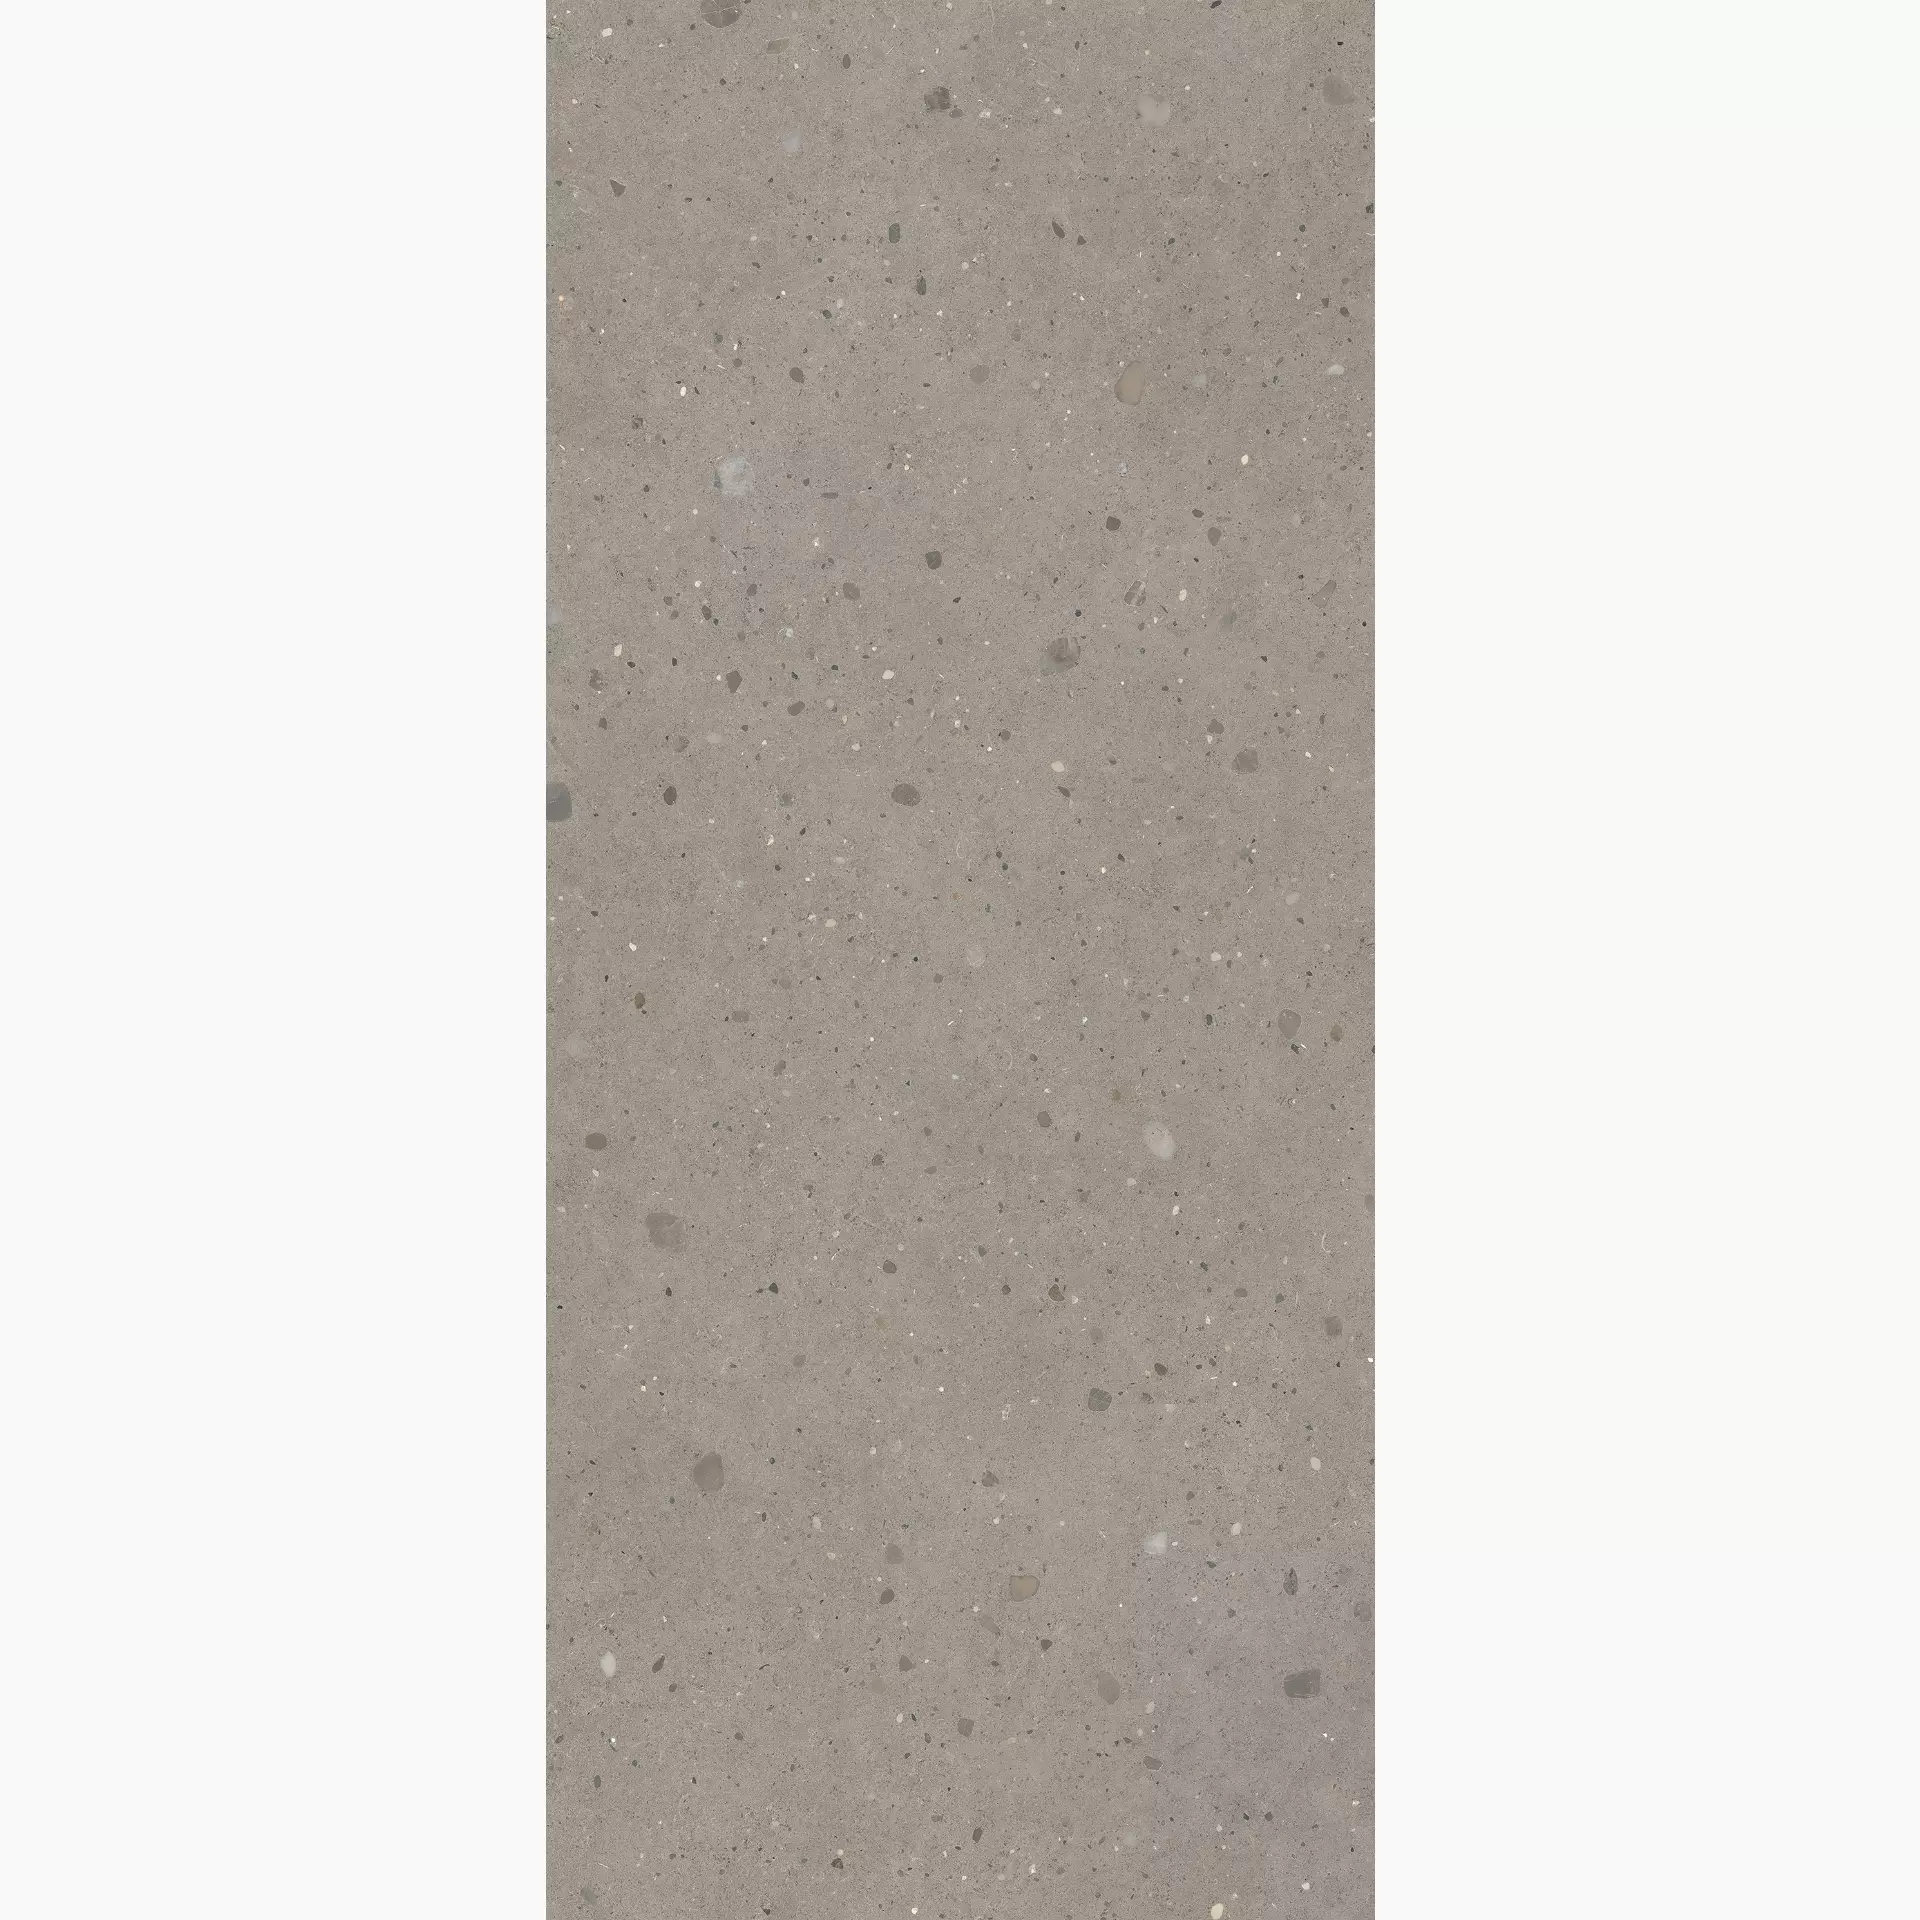 Fondovalle Keynote Cool Grey Natural KEY023 120x278cm rectified 6,5mm